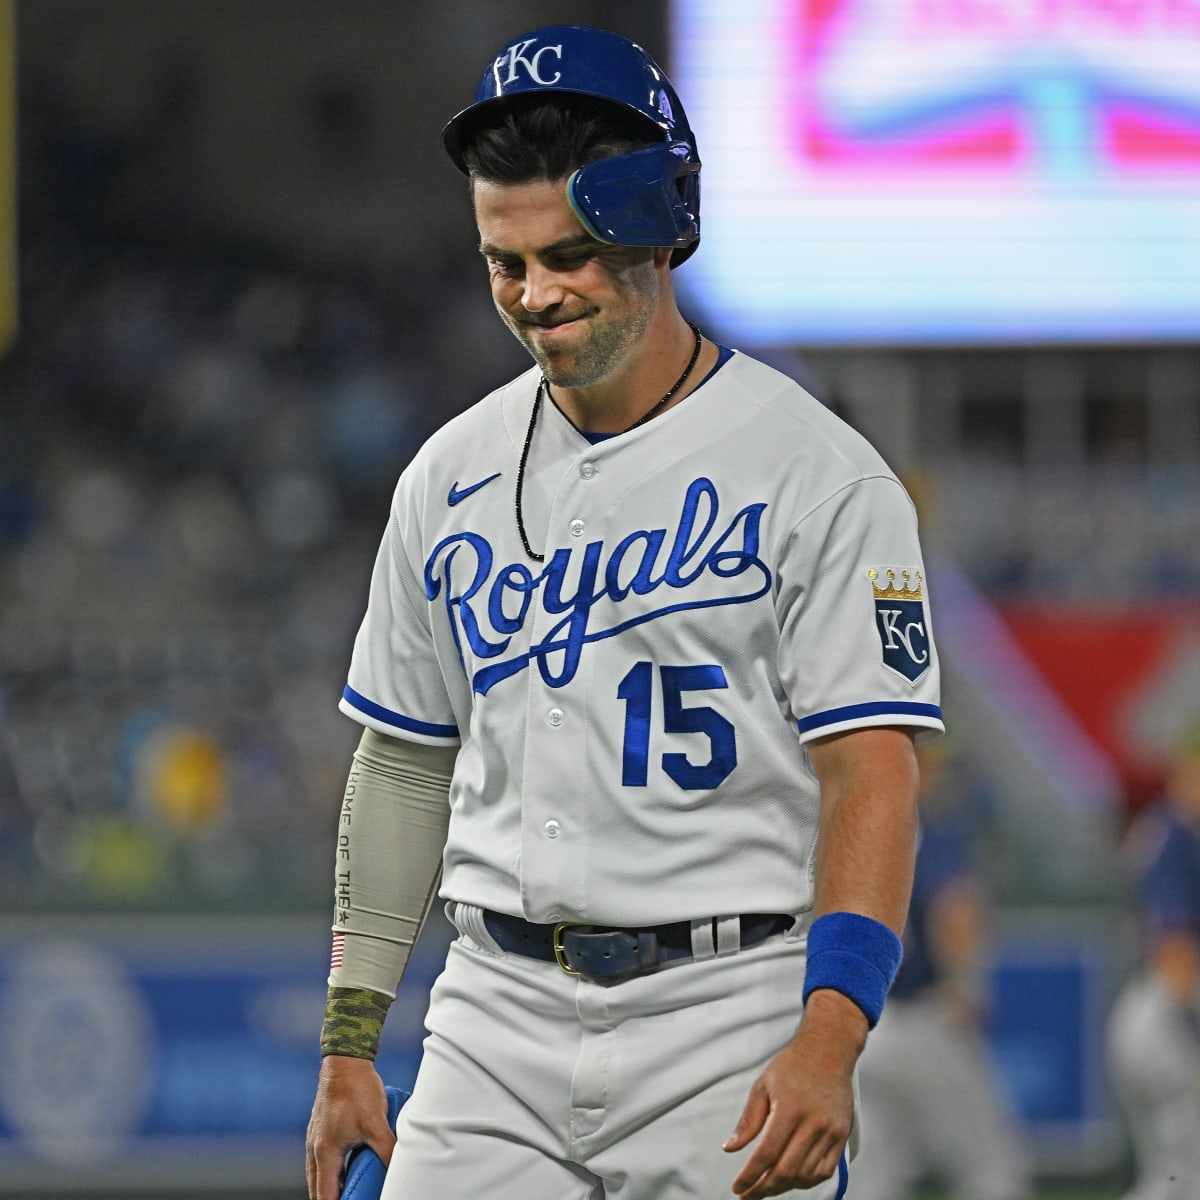 Royals' Merrifield ends streak of playing 553 straight games